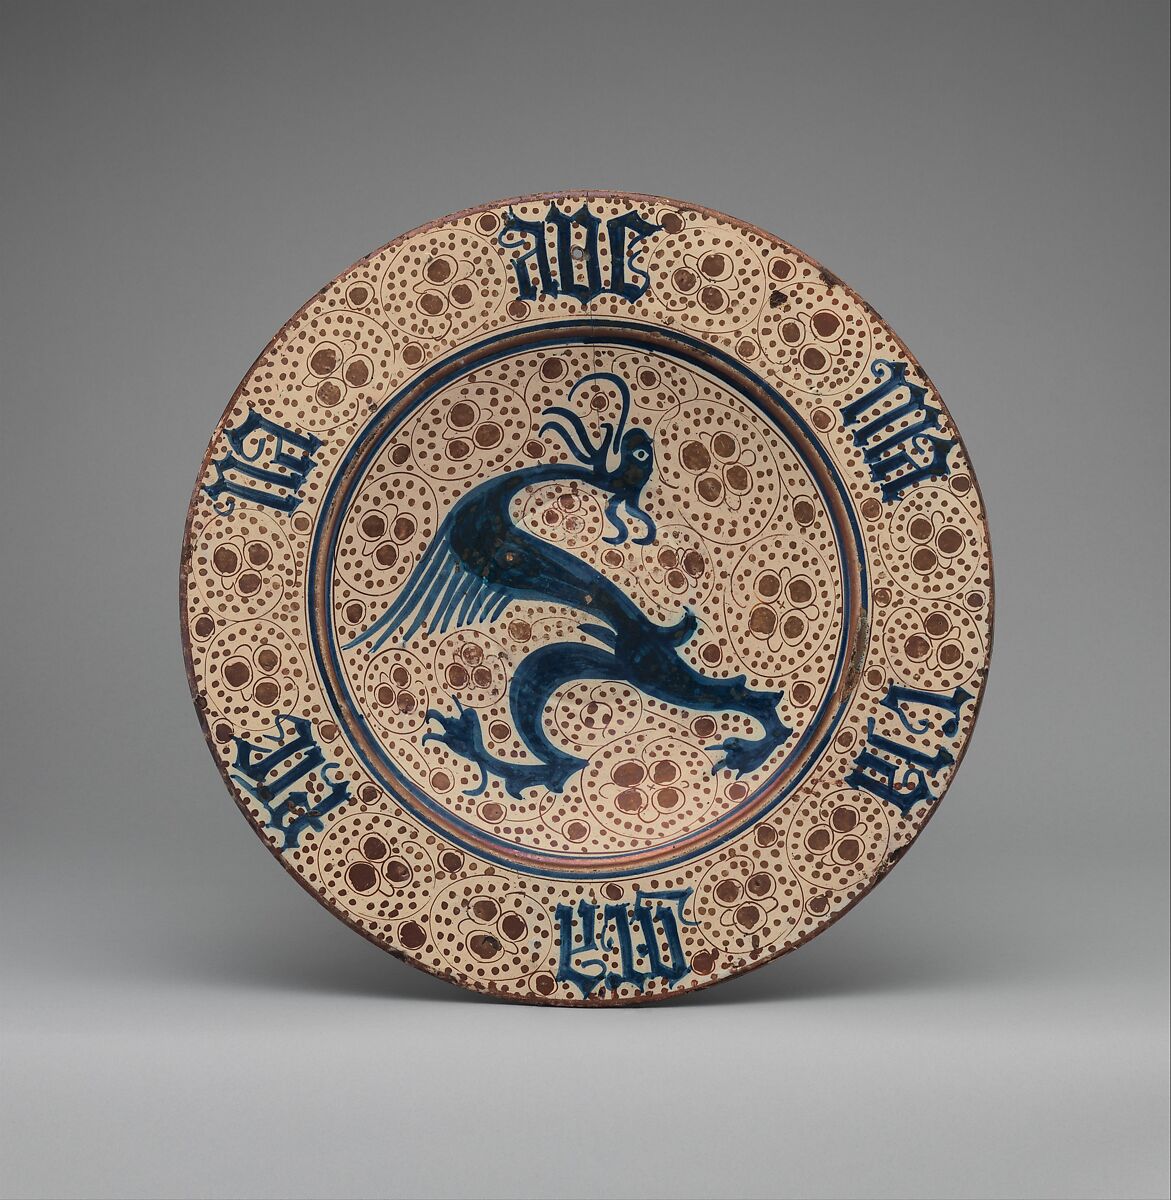 Plate with Dragon and Ave Maria Inscription, Tin-glazed earthenware, Spanish